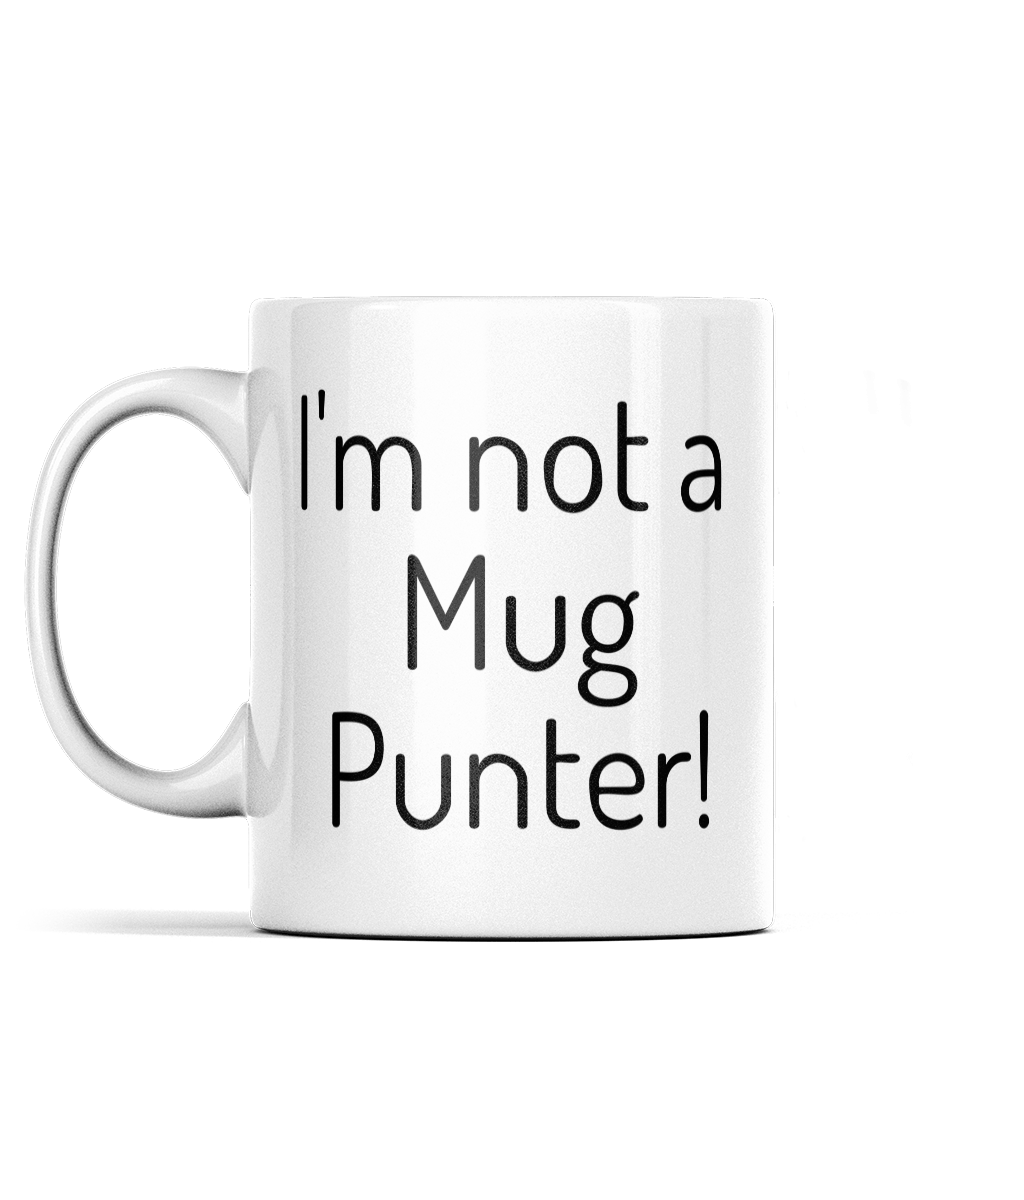 4 Funny Horse Racing Quote Mugs